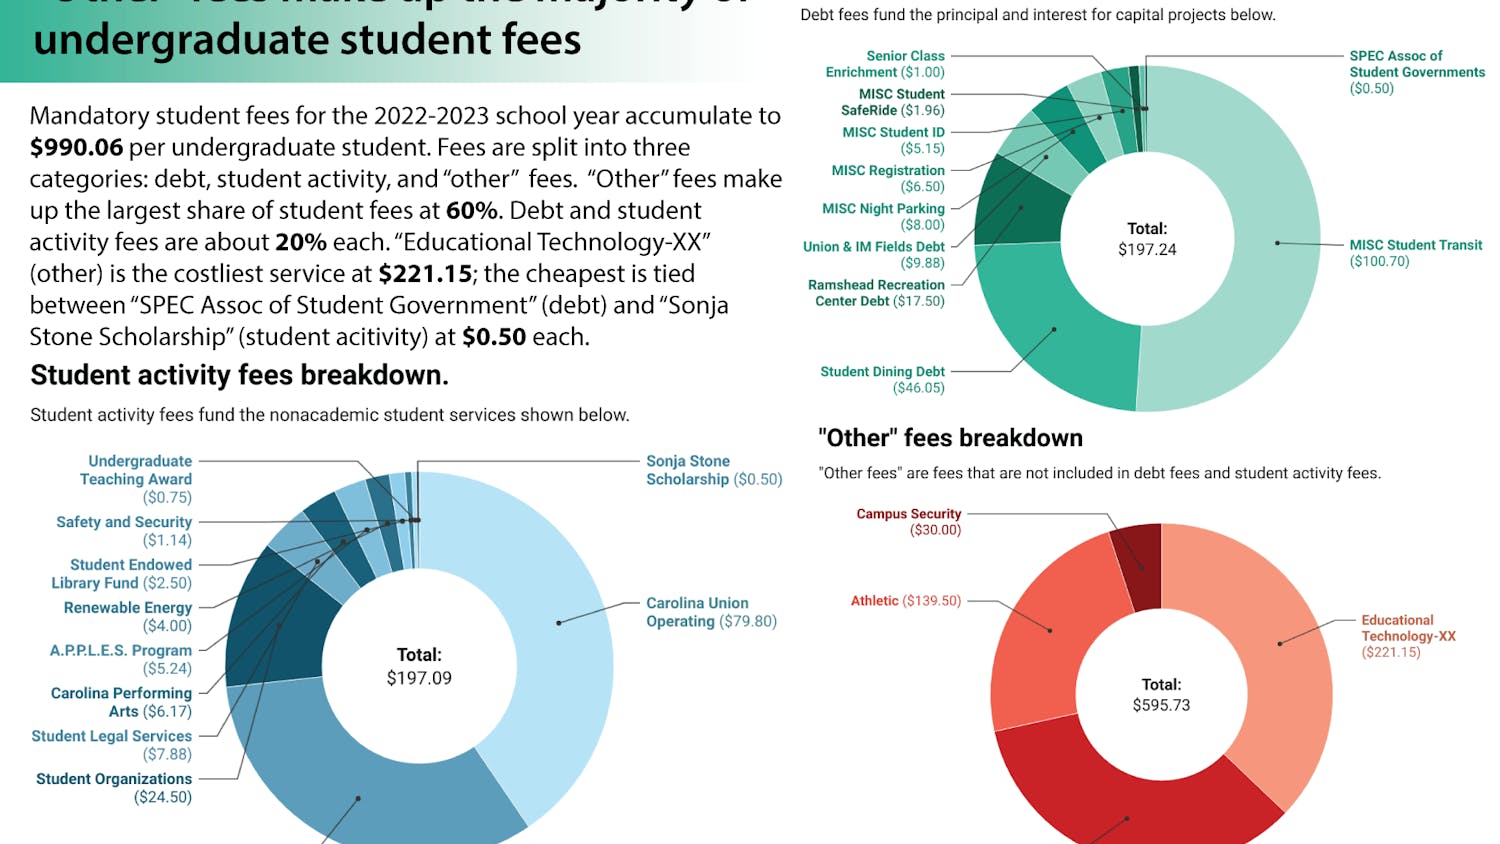 "Others" fees make up the majority of undergraduate student fees